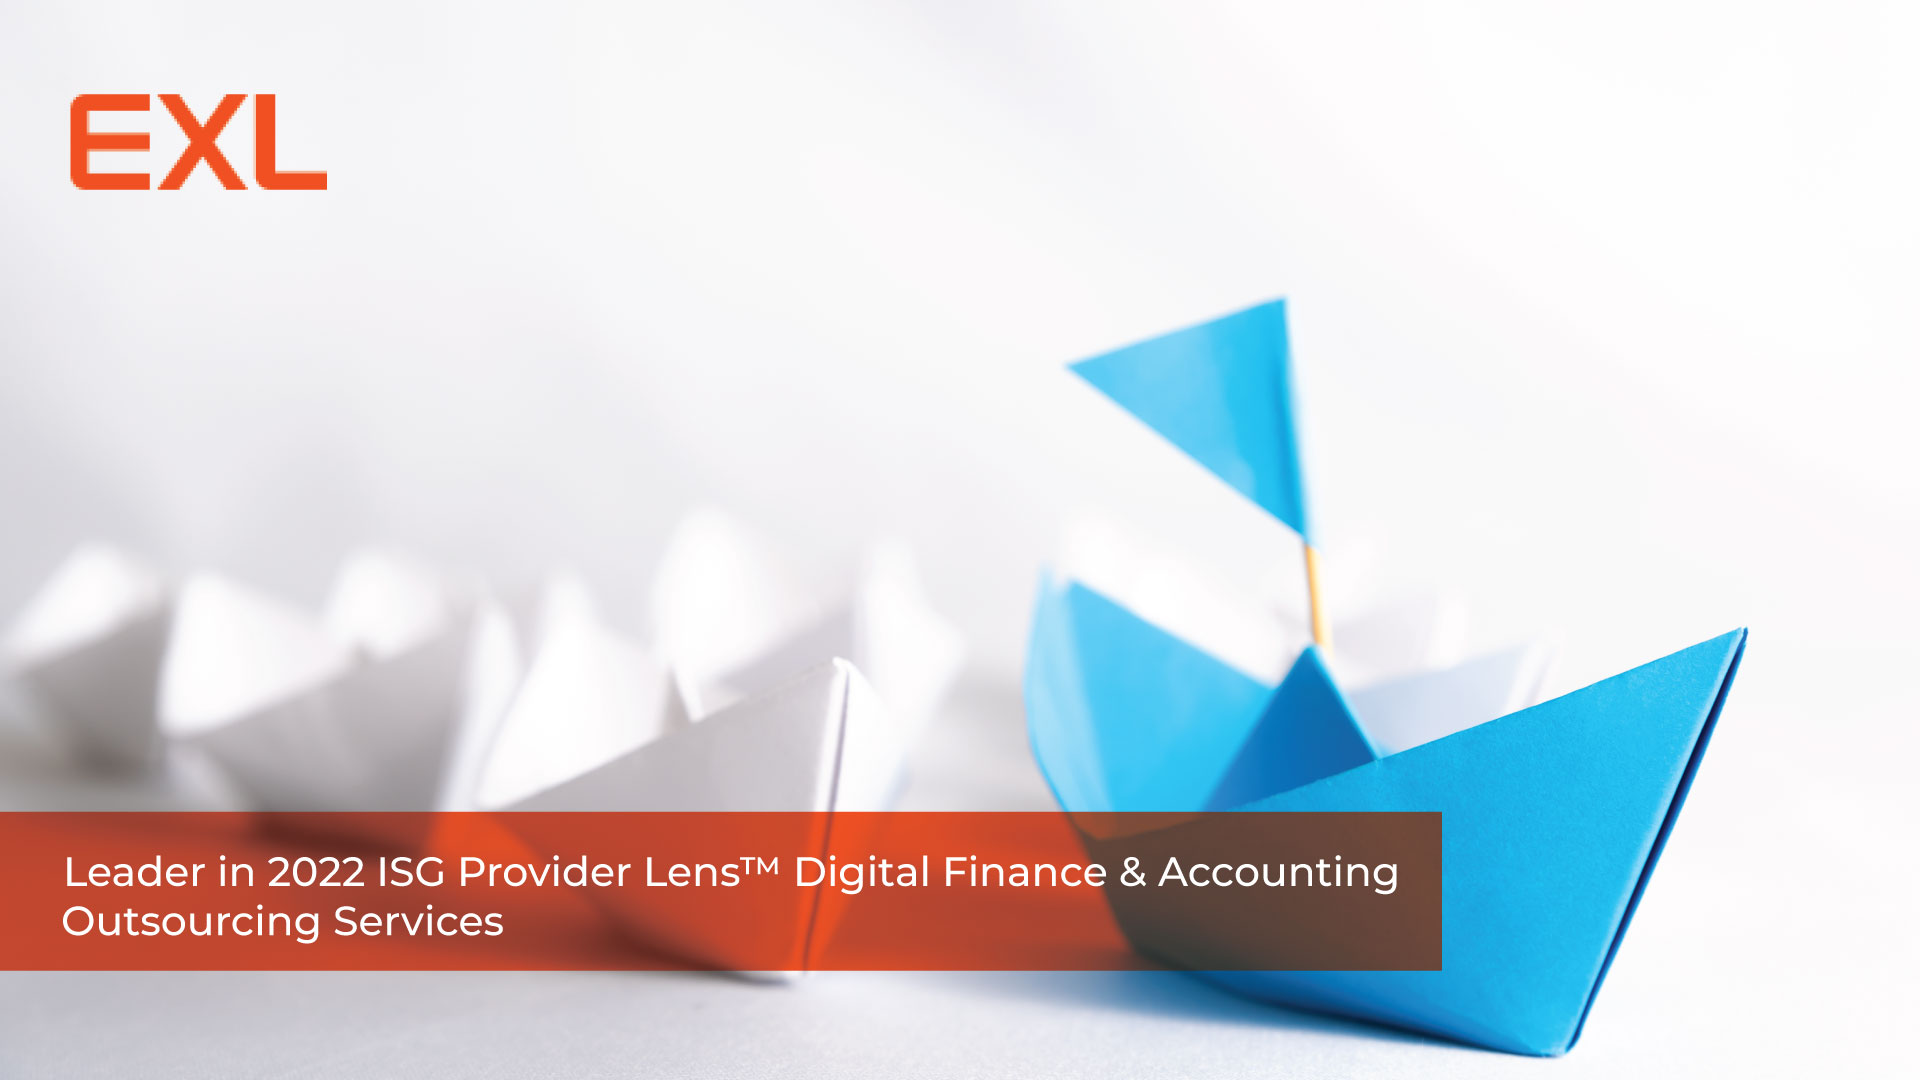 EXL recognized as a Leader in 2022 ISG Provider Lens™ Digital Finance & Accounting Outsourcing Services